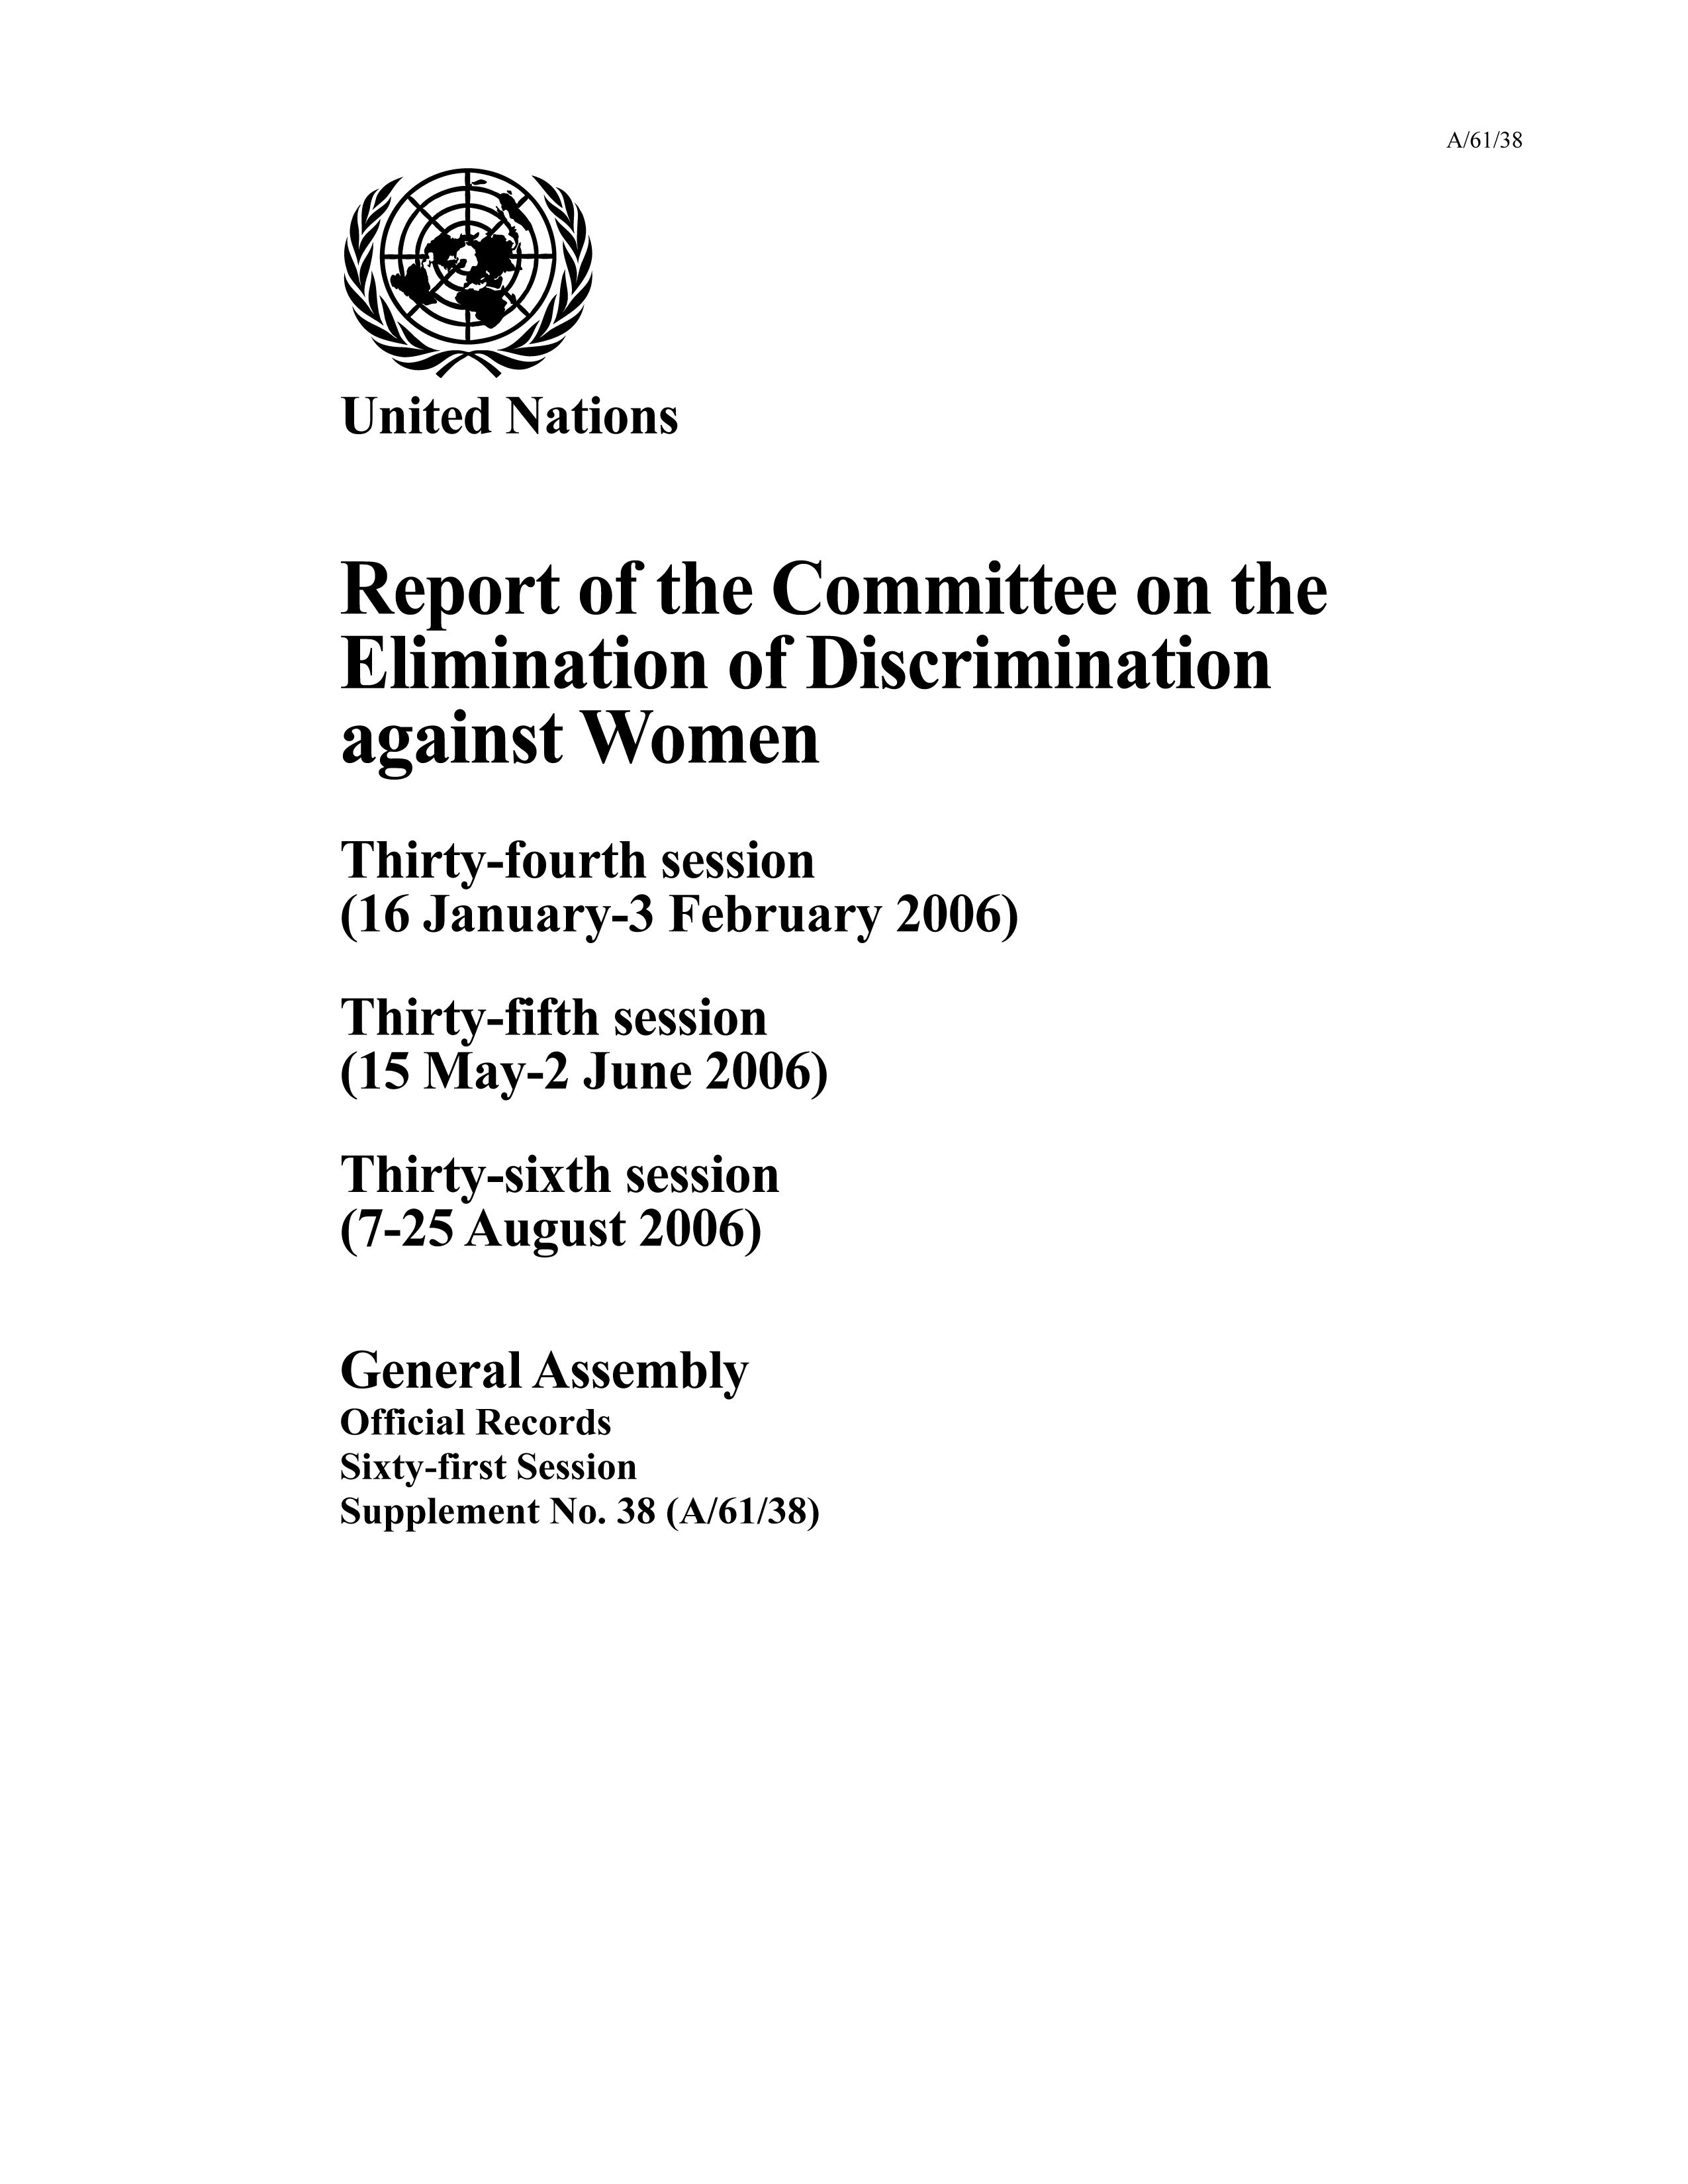 image of Status of submission and consideration of reports submitted by States parties under article 18 of the Convention on the Elimination of All Forms of Discrimination against Women, as at 31 August 2006